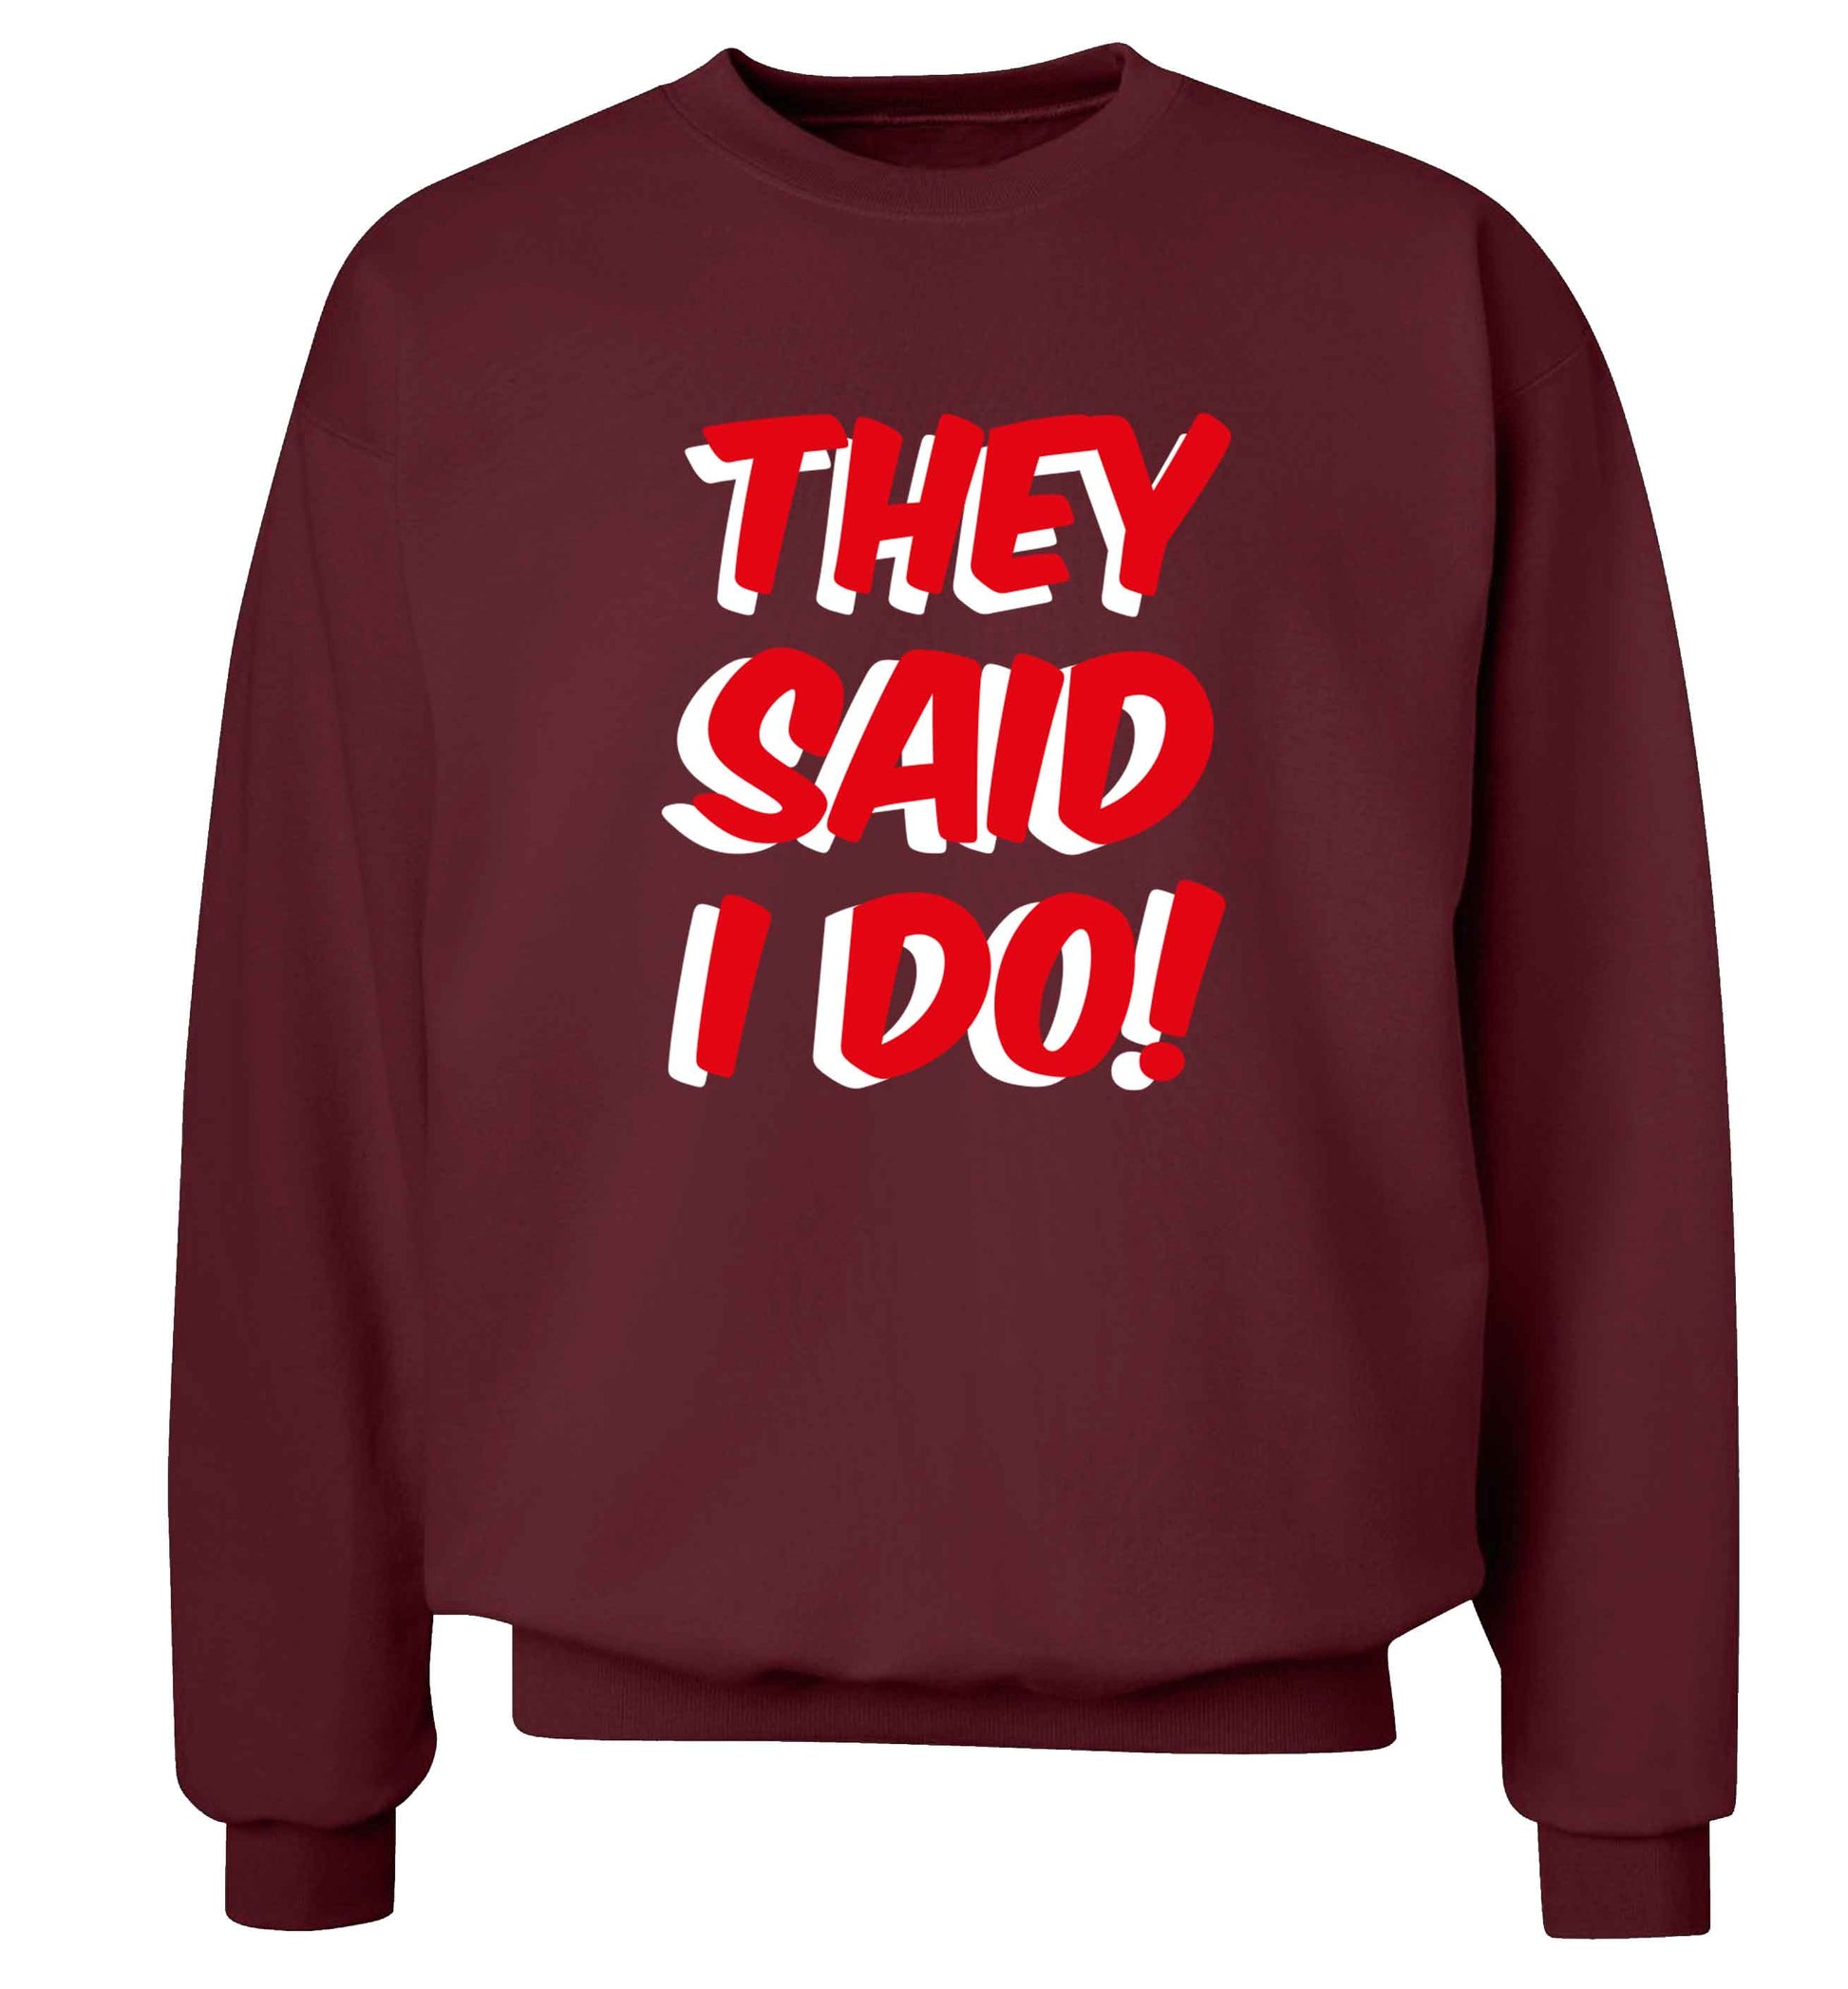 They said I do adult's unisex maroon sweater 2XL